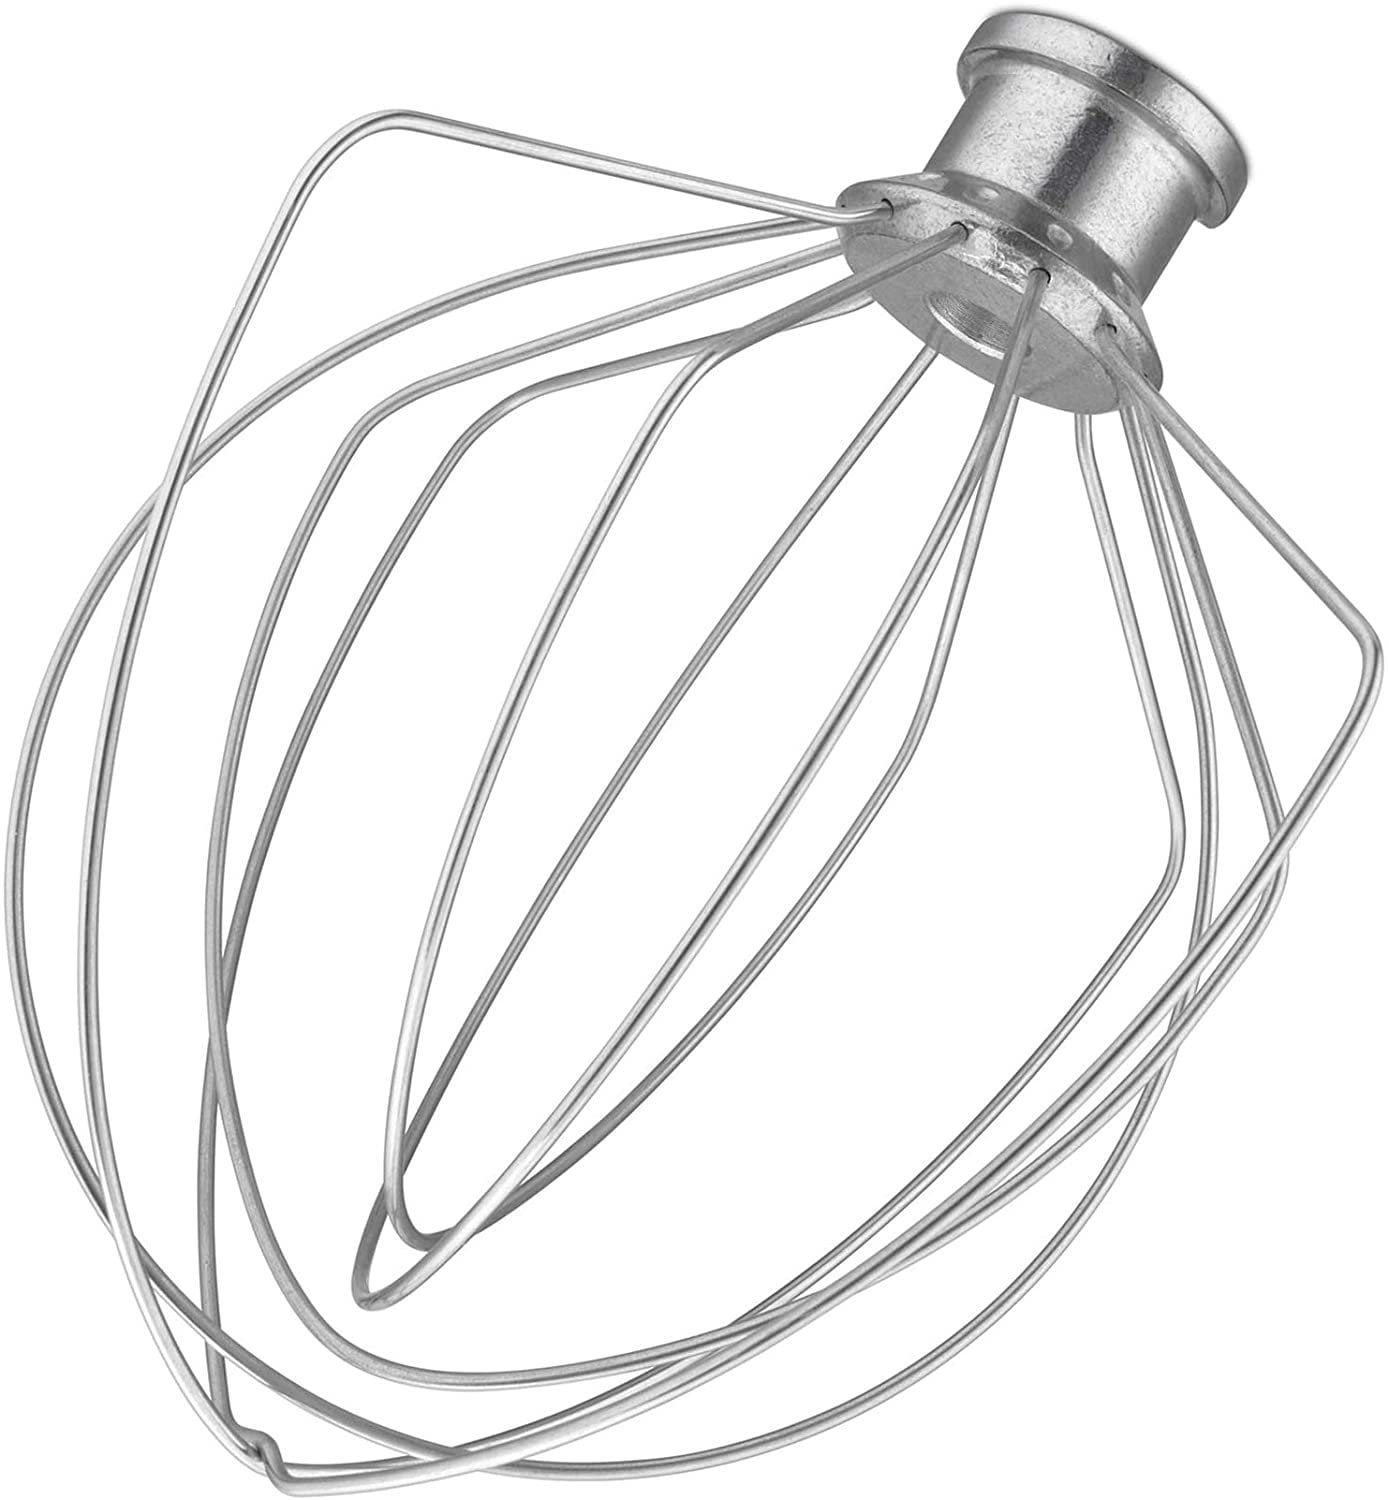 Stainless Steel 6-Wire Whip Attachment for KitchenAid 3.5 Quart Tilt-Head  Stand Mixer KSM3311 and KSM3316, Heavy Duty, Dishwasher Safe, 3.5-Qt Whisk